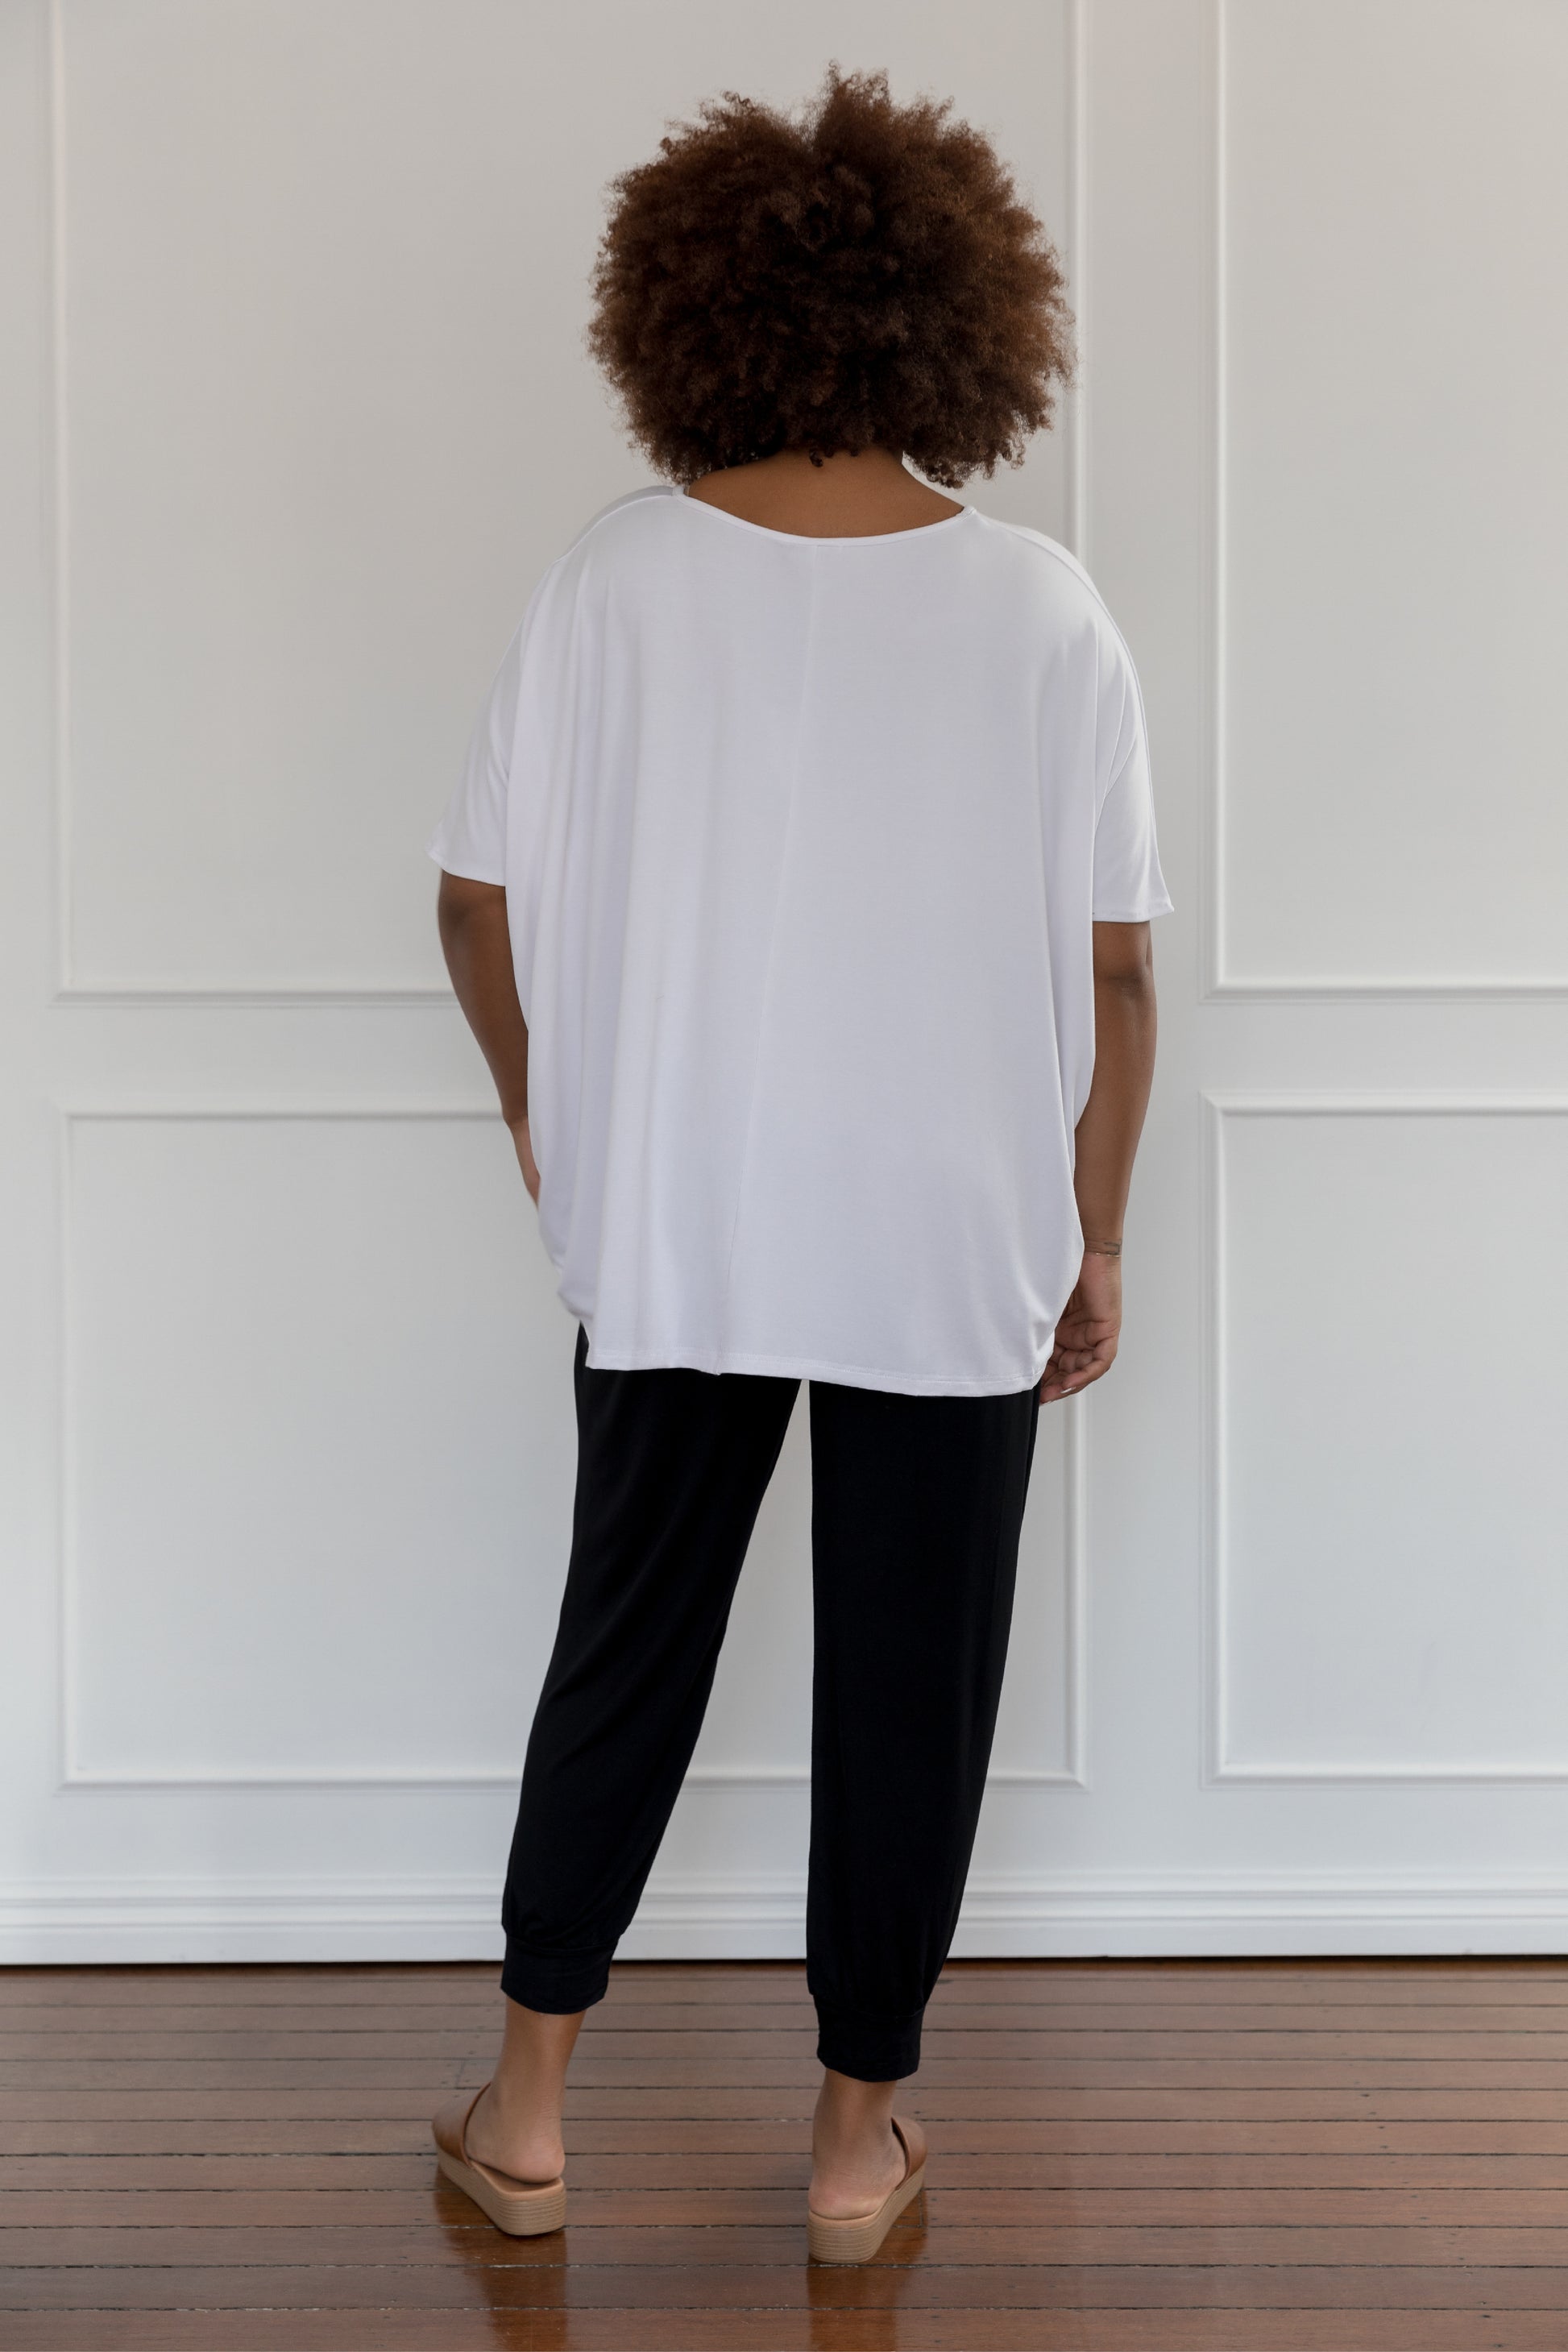 Plus-Sized White Tops | PQ Collection | Nice Top